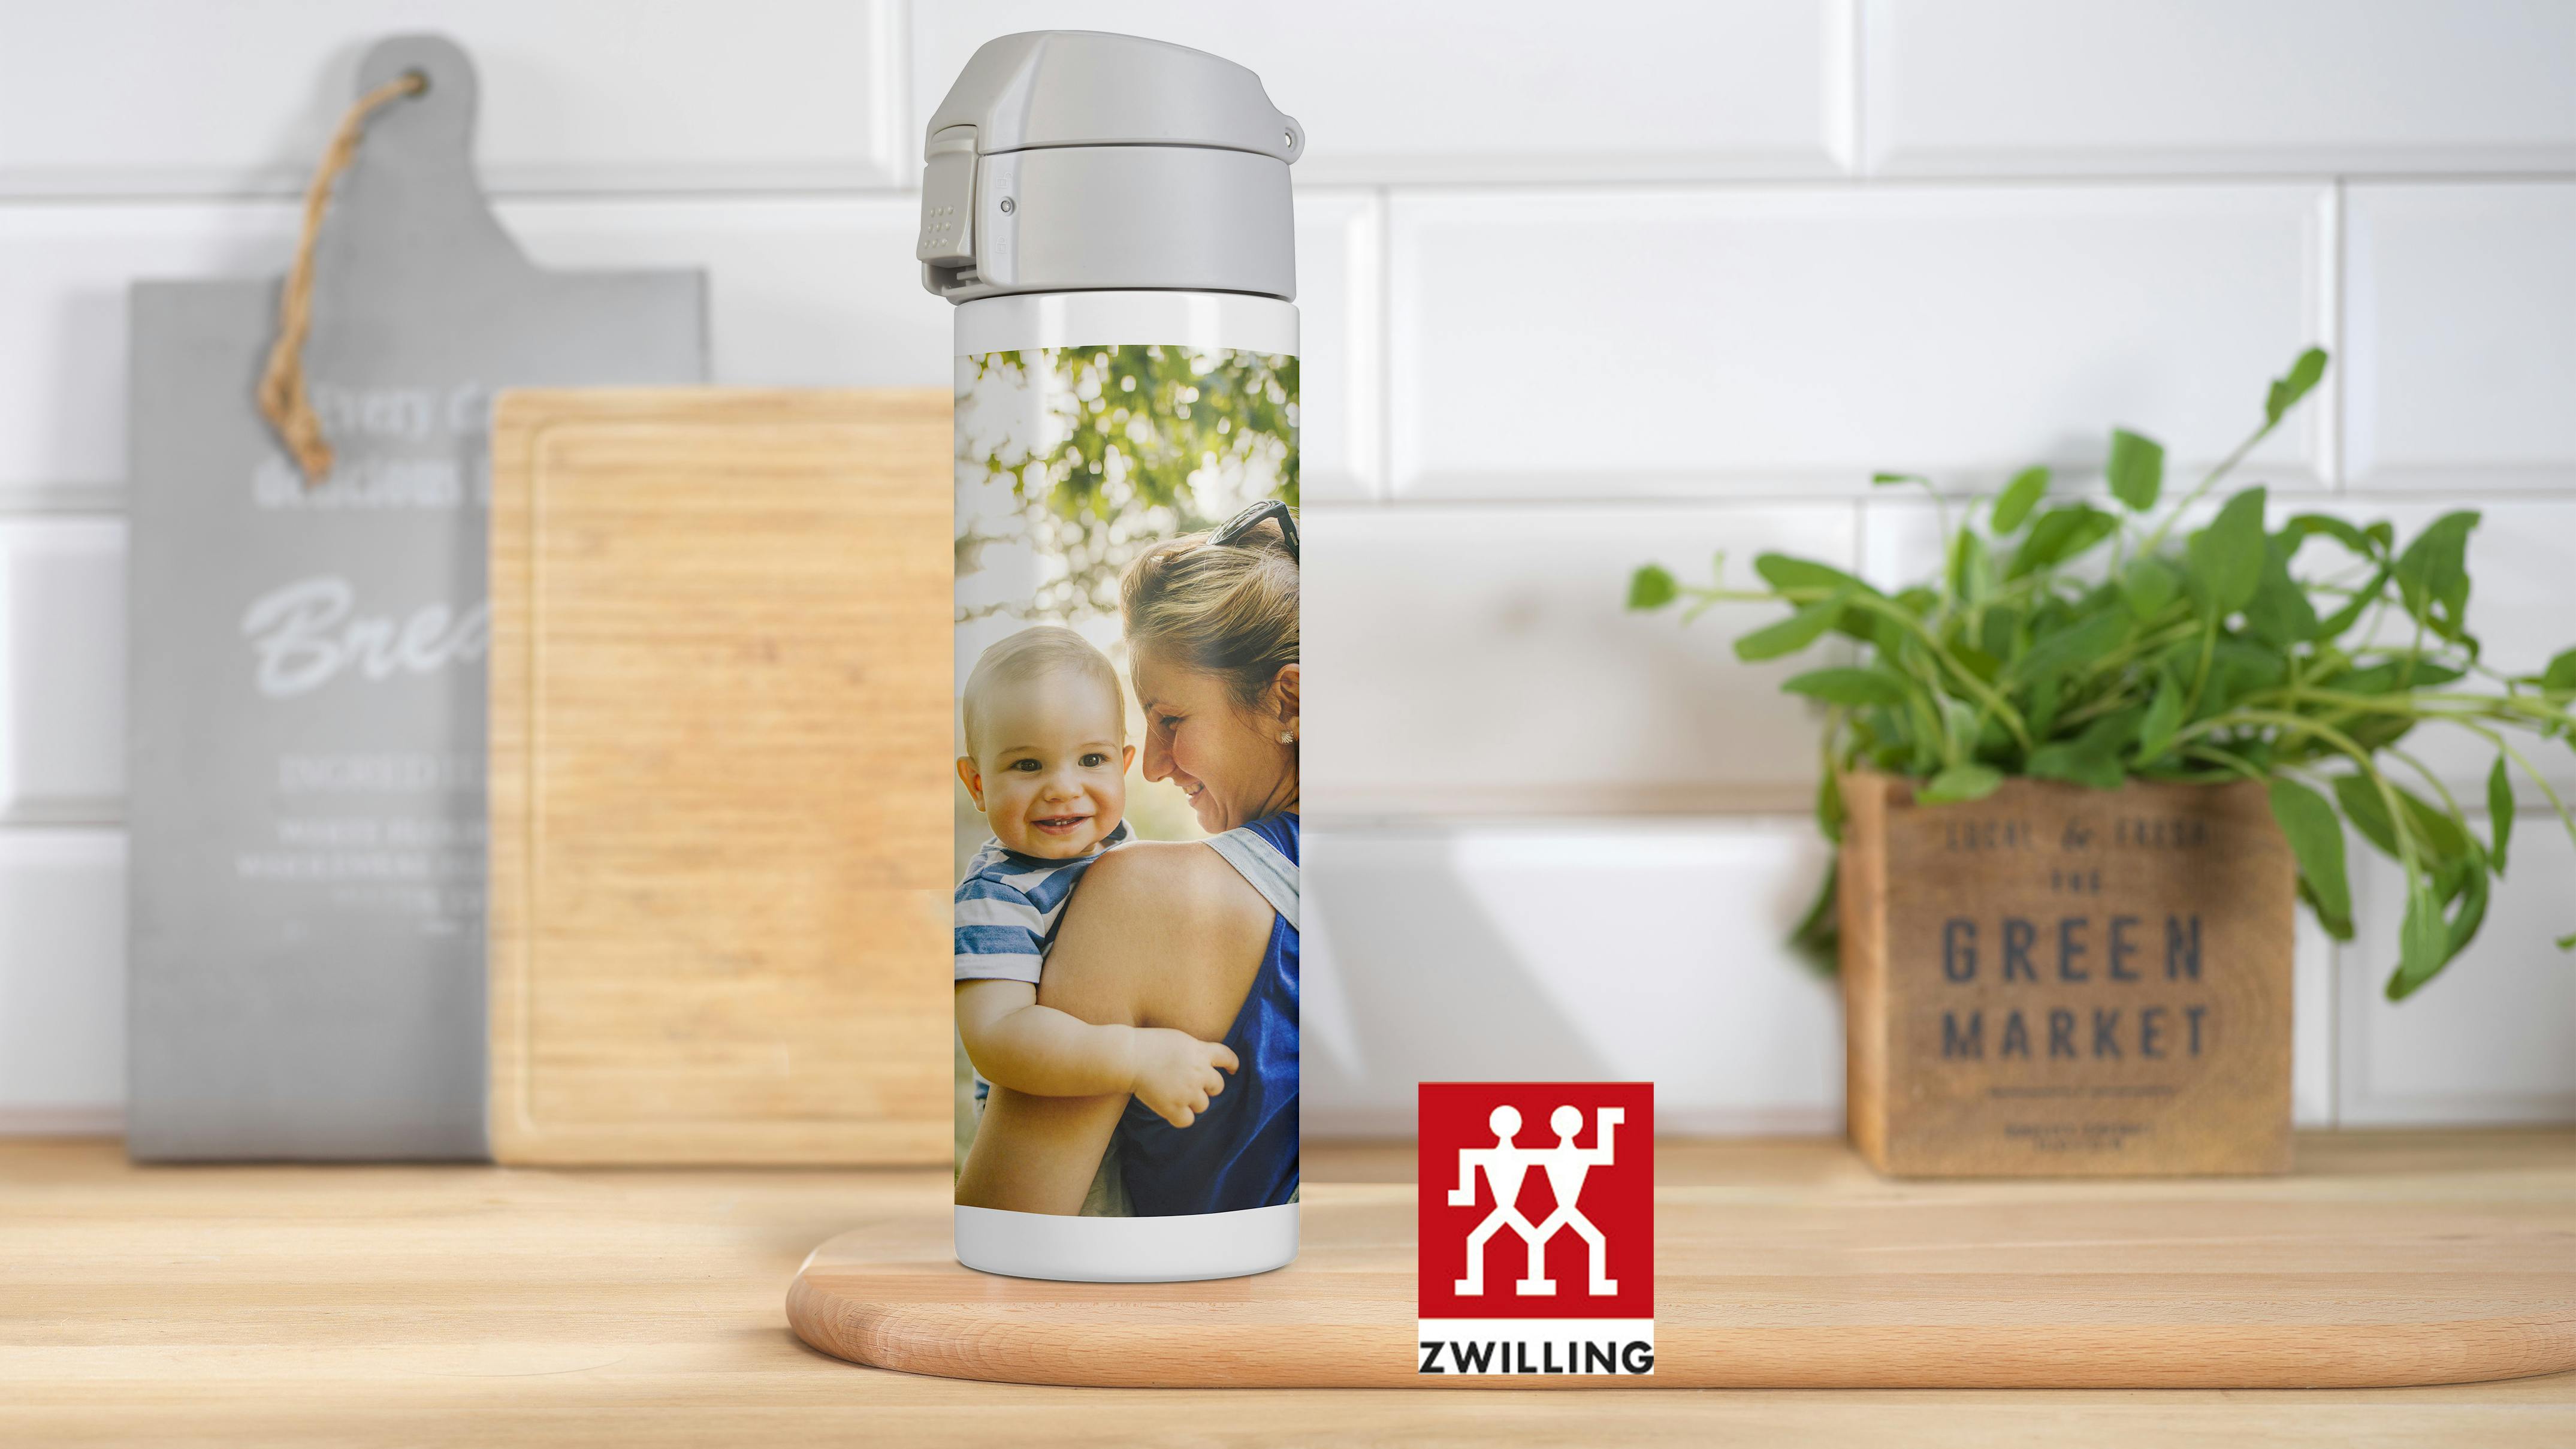 ZWILLING thermo mug with photo in a kitchen setting with a family photo